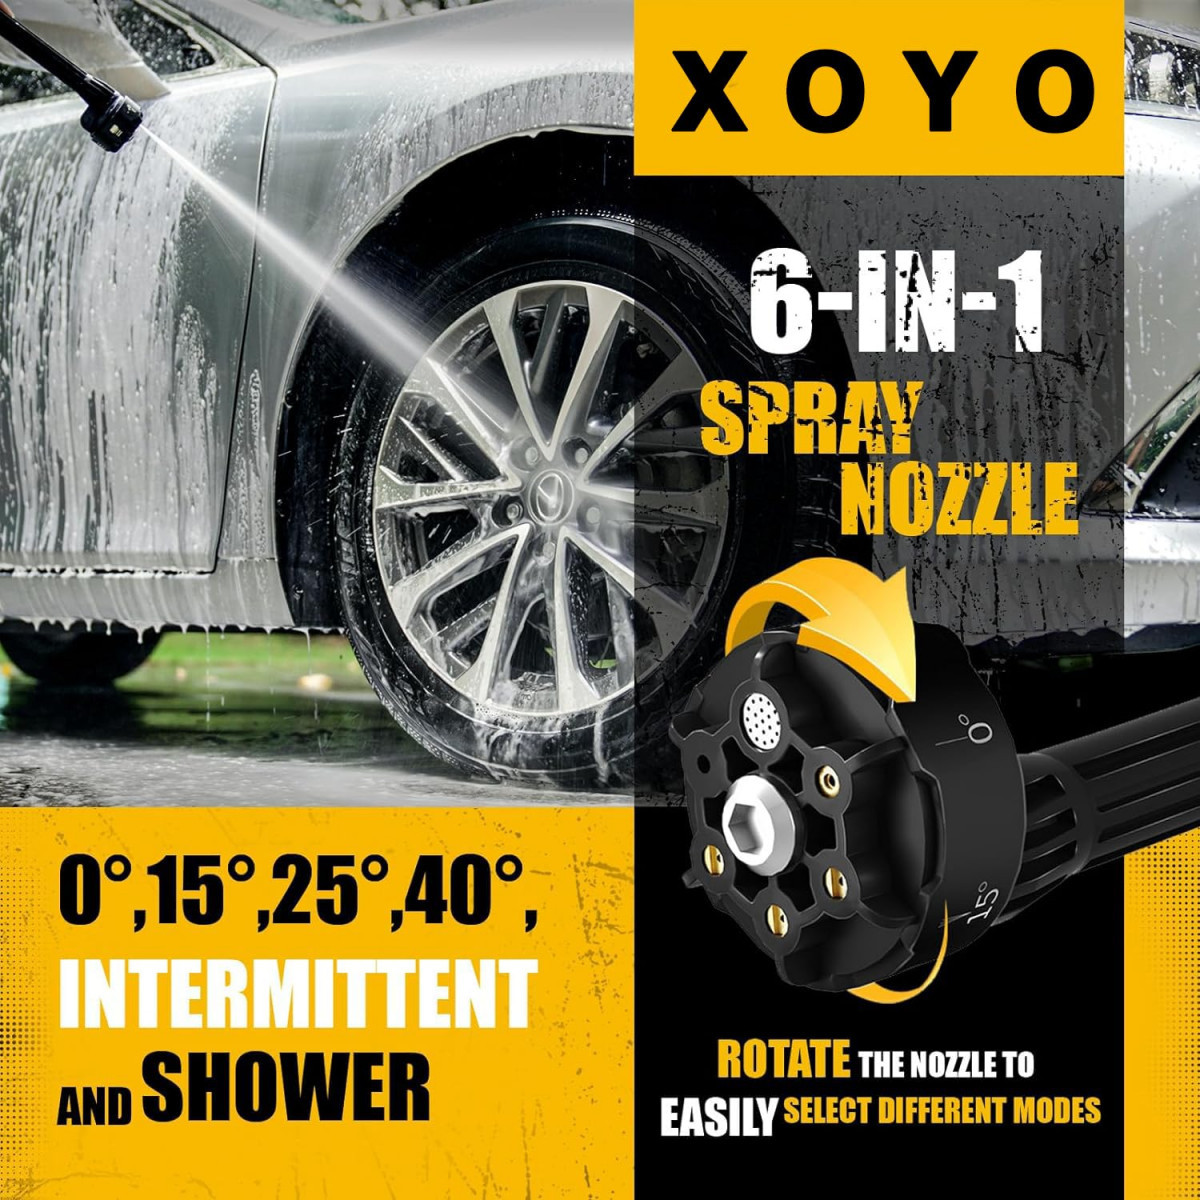 Cordless Pressure Washer 48Vx2 DUAL Batteries Xoyo Pro 652 PSI Portable Powerful Car Washer with 6-in-1 Nozzle Handheld Multi Cleaning Spary Gun for HomeFloorFenceGardeningPanel Cleaning Works